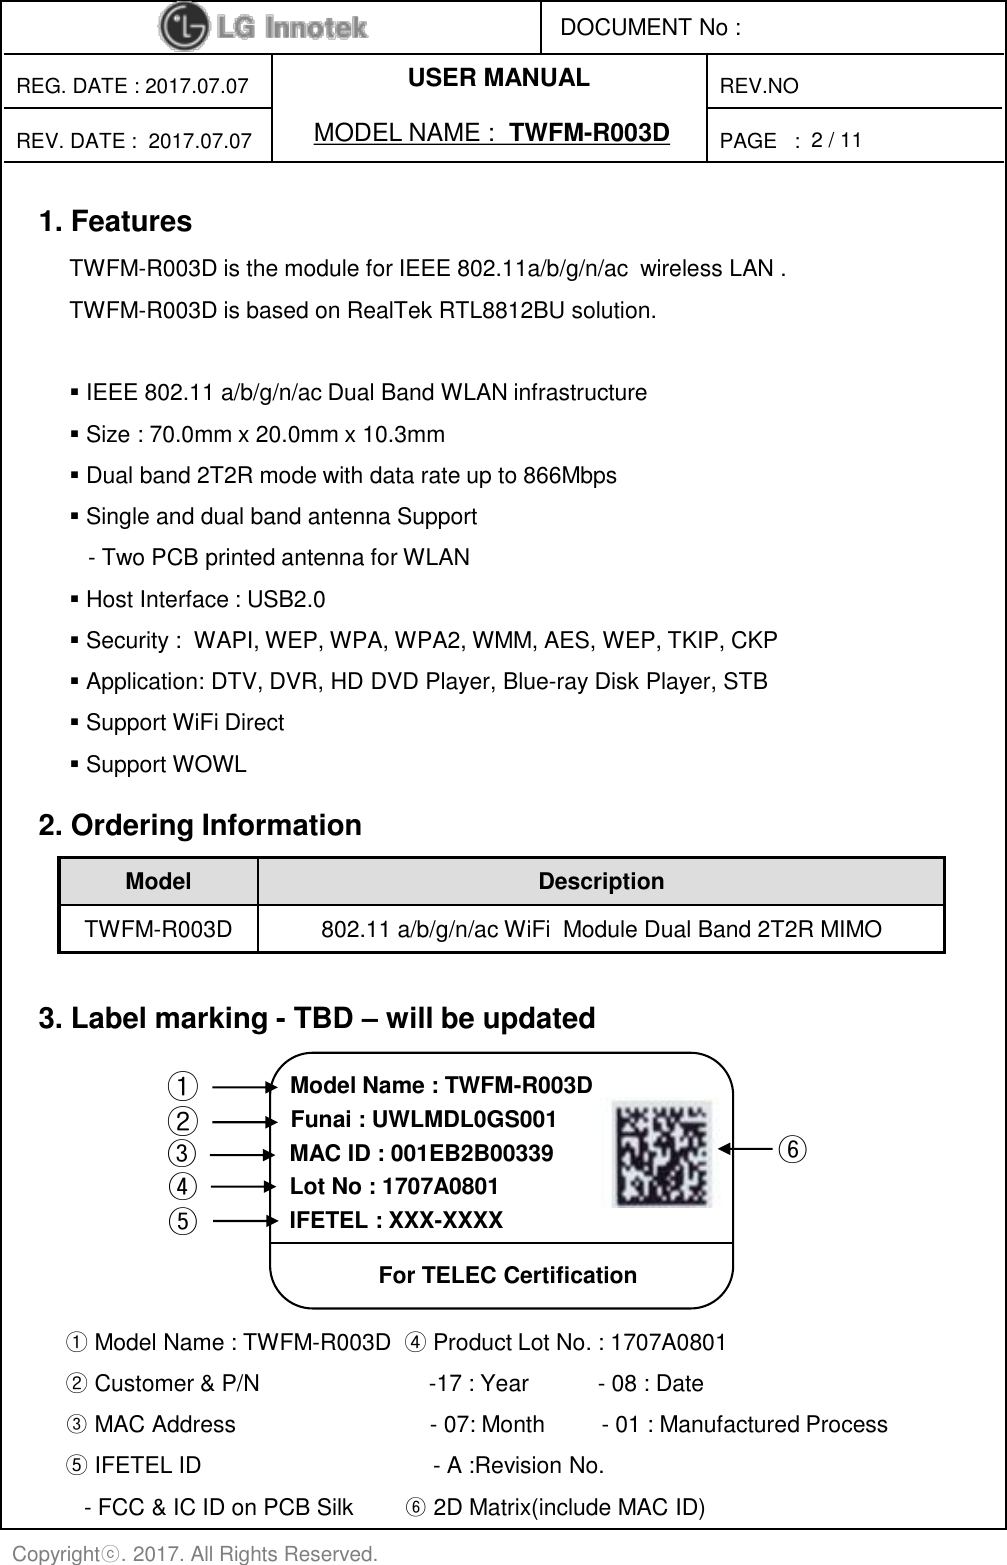 PAGE   : DOCUMENT No : REG. DATE : 2017.07.07 MODEL NAME :  TWFM-R003D REV. DATE :  2017.07.07 REV.NO Copyrightⓒ. 2017. All Rights Reserved. 2 / 11 USER MANUAL 2. Ordering Information Model  Description TWFM-R003D  802.11 a/b/g/n/ac WiFi  Module Dual Band 2T2R MIMO 1. Features TWFM-R003D is the module for IEEE 802.11a/b/g/n/ac  wireless LAN .  TWFM-R003D is based on RealTek RTL8812BU solution.   IEEE 802.11 a/b/g/n/ac Dual Band WLAN infrastructure  Size : 70.0mm x 20.0mm x 10.3mm  Dual band 2T2R mode with data rate up to 866Mbps  Single and dual band antenna Support    - Two PCB printed antenna for WLAN  Host Interface : USB2.0   Security :  WAPI, WEP, WPA, WPA2, WMM, AES, WEP, TKIP, CKP  Application: DTV, DVR, HD DVD Player, Blue-ray Disk Player, STB  Support WiFi Direct  Support WOWL 3. Label marking - TBD – will be updated ① Model Name : TWFM-R003D  ④ Product Lot No. : 1707A0801  ② Customer &amp; P/N                           -17 : Year           - 08 : Date ③ MAC Address                               - 07: Month         - 01 : Manufactured Process ⑤ IFETEL ID                                     - A :Revision No.     - FCC &amp; IC ID on PCB Silk        ⑥ 2D Matrix(include MAC ID) ① ③ ④ ⑥ Model Name : TWFM-R003D MAC ID : 001EB2B00339 IFETEL : XXX-XXXX  Funai : UWLMDL0GS001 For TELEC Certification Lot No : 1707A0801 ② ⑤ 